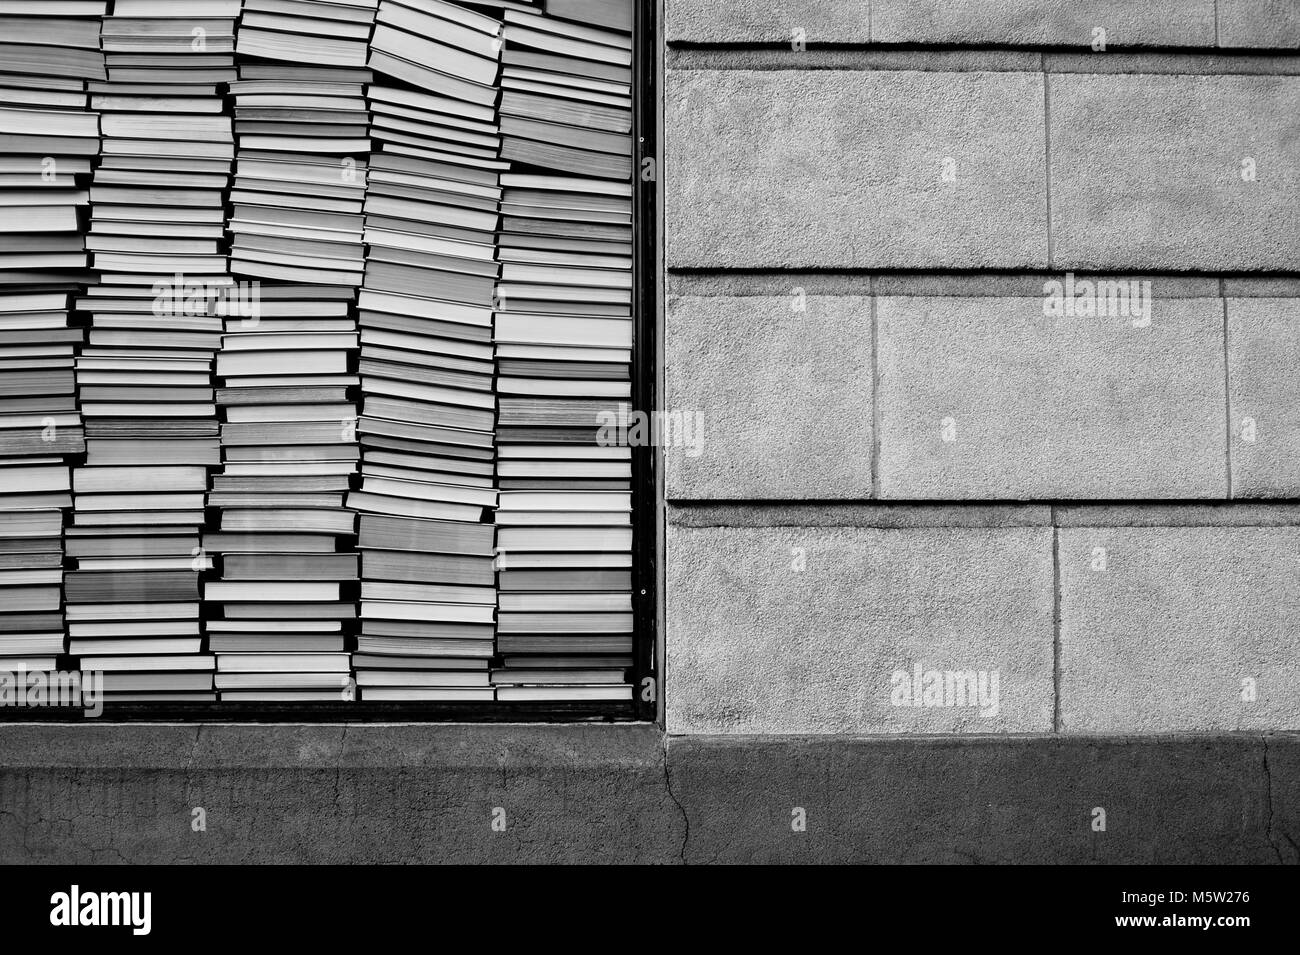 Books stacked against window with brick wall beside them Stock Photo